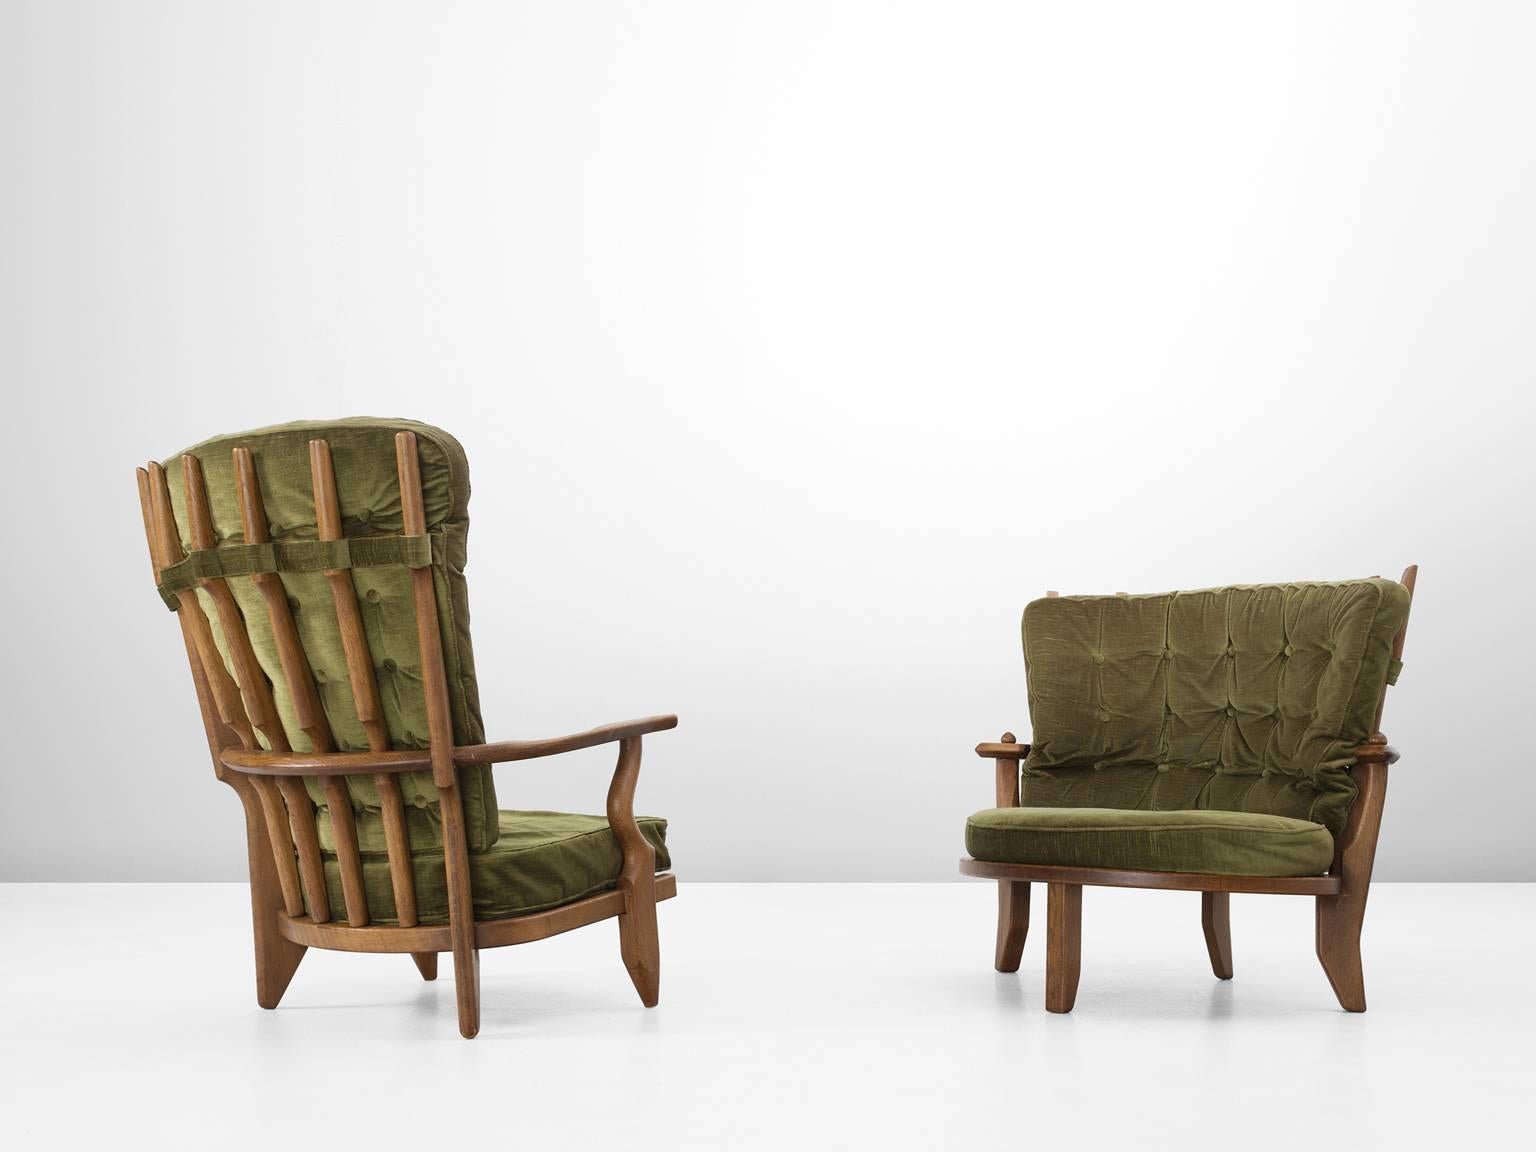 Set of two armchairs, in oak and fabric by Guillerme et Chambron, France, 1960.

High back 'Adam' lounge chair and 'Eve' easy chair in solid oak with the typical characteristic decorative details at the back and capricious forms of the legs. Very